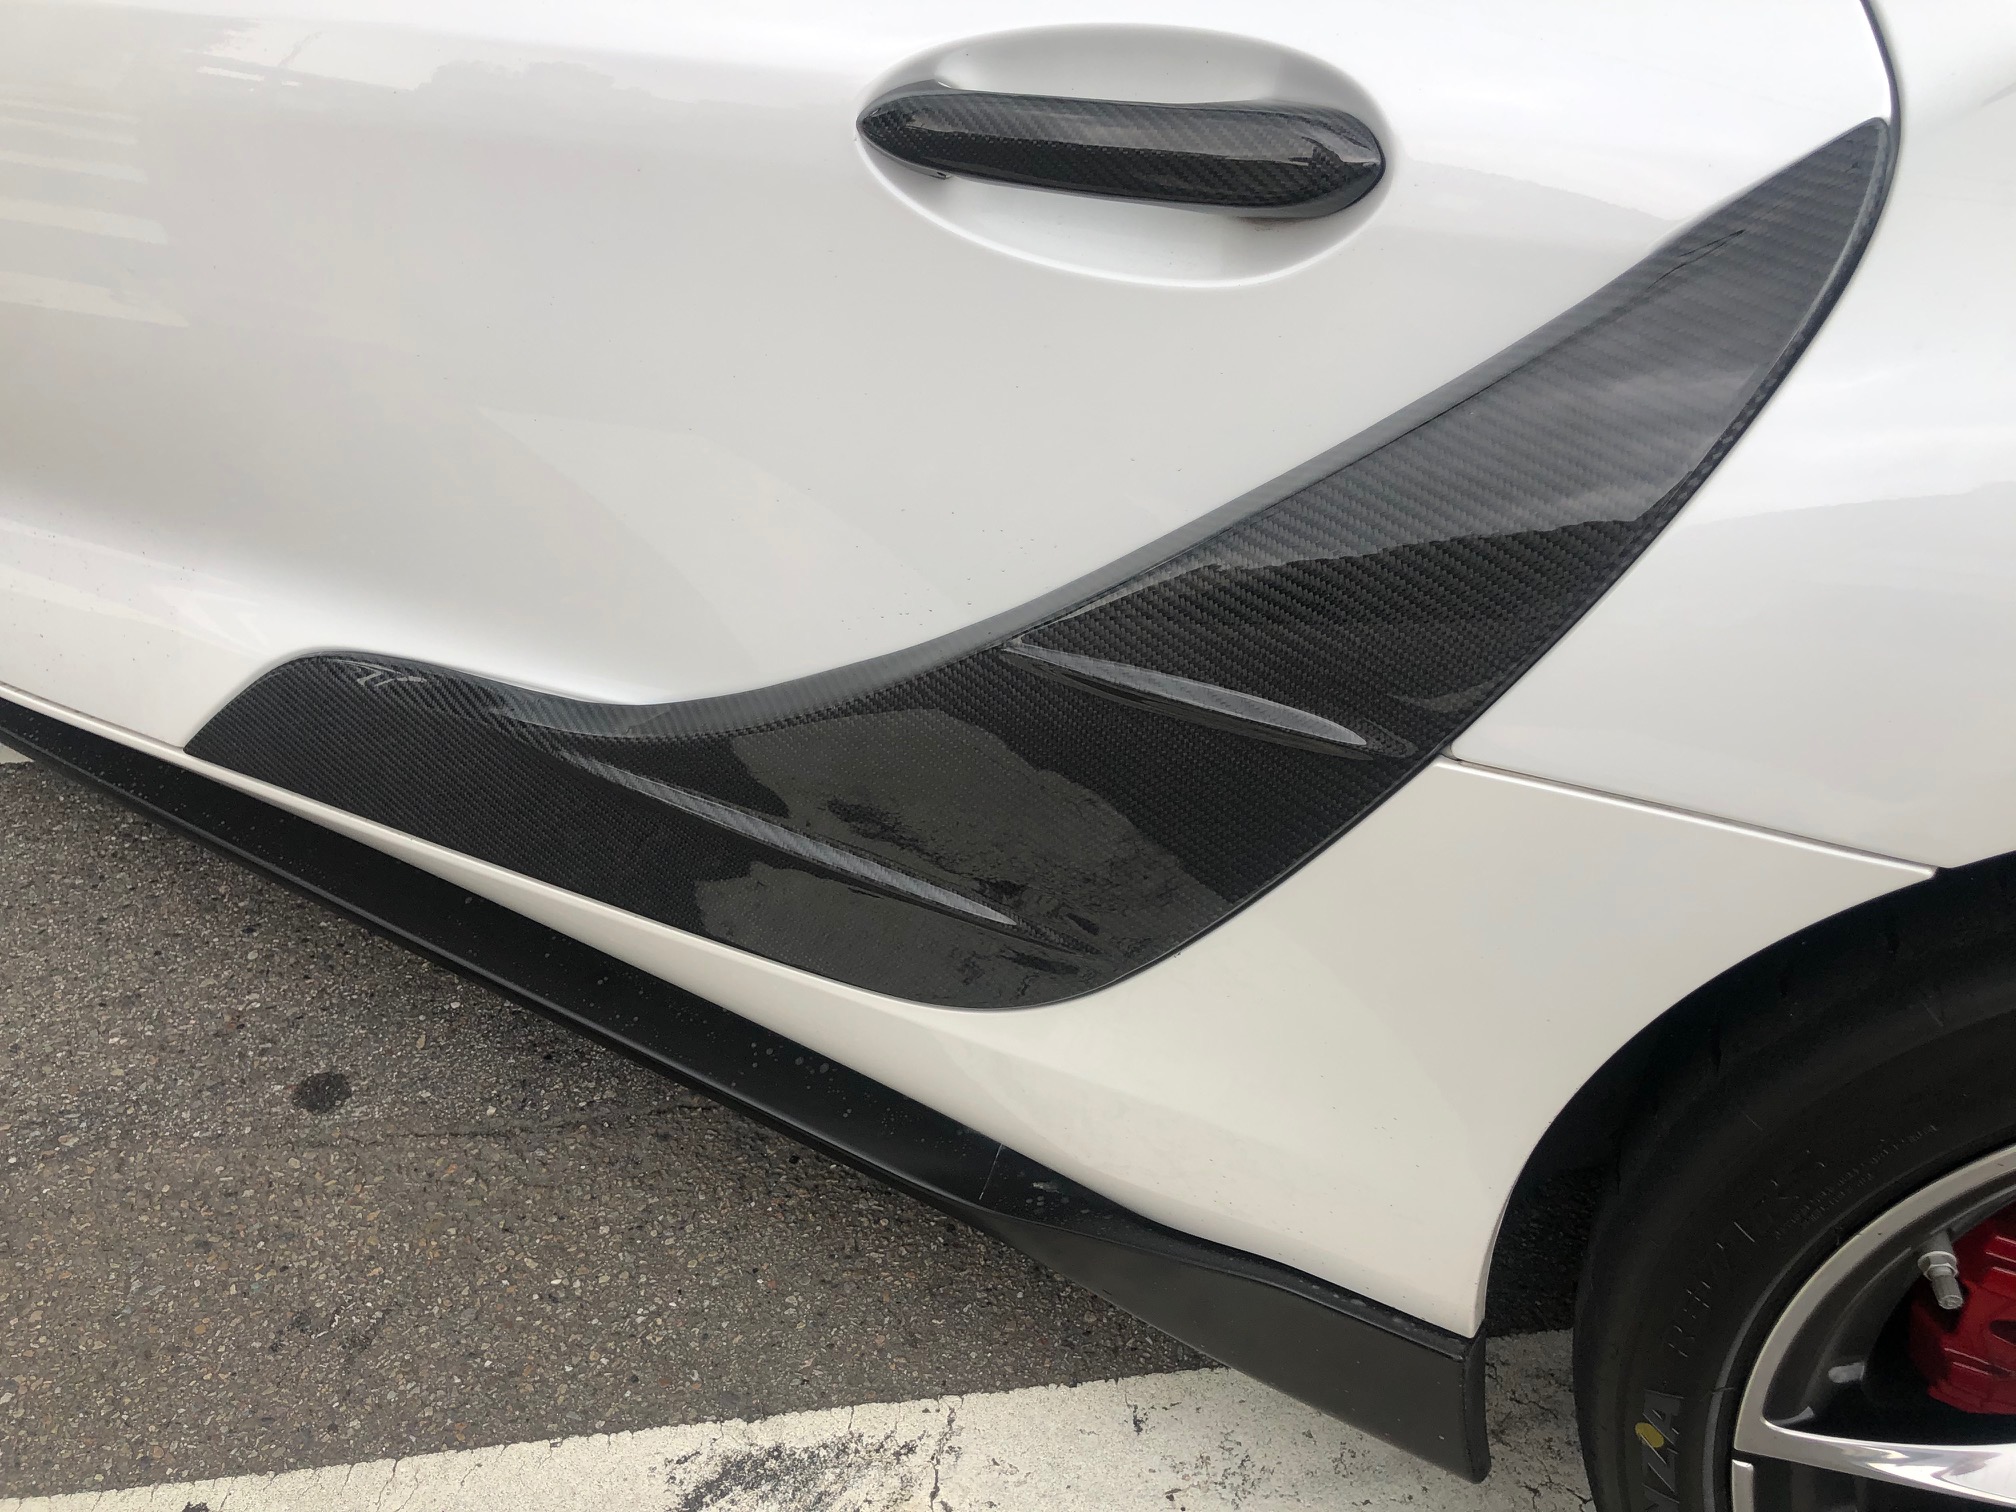 2020 up Supra A90 Carbon side vent delete covers